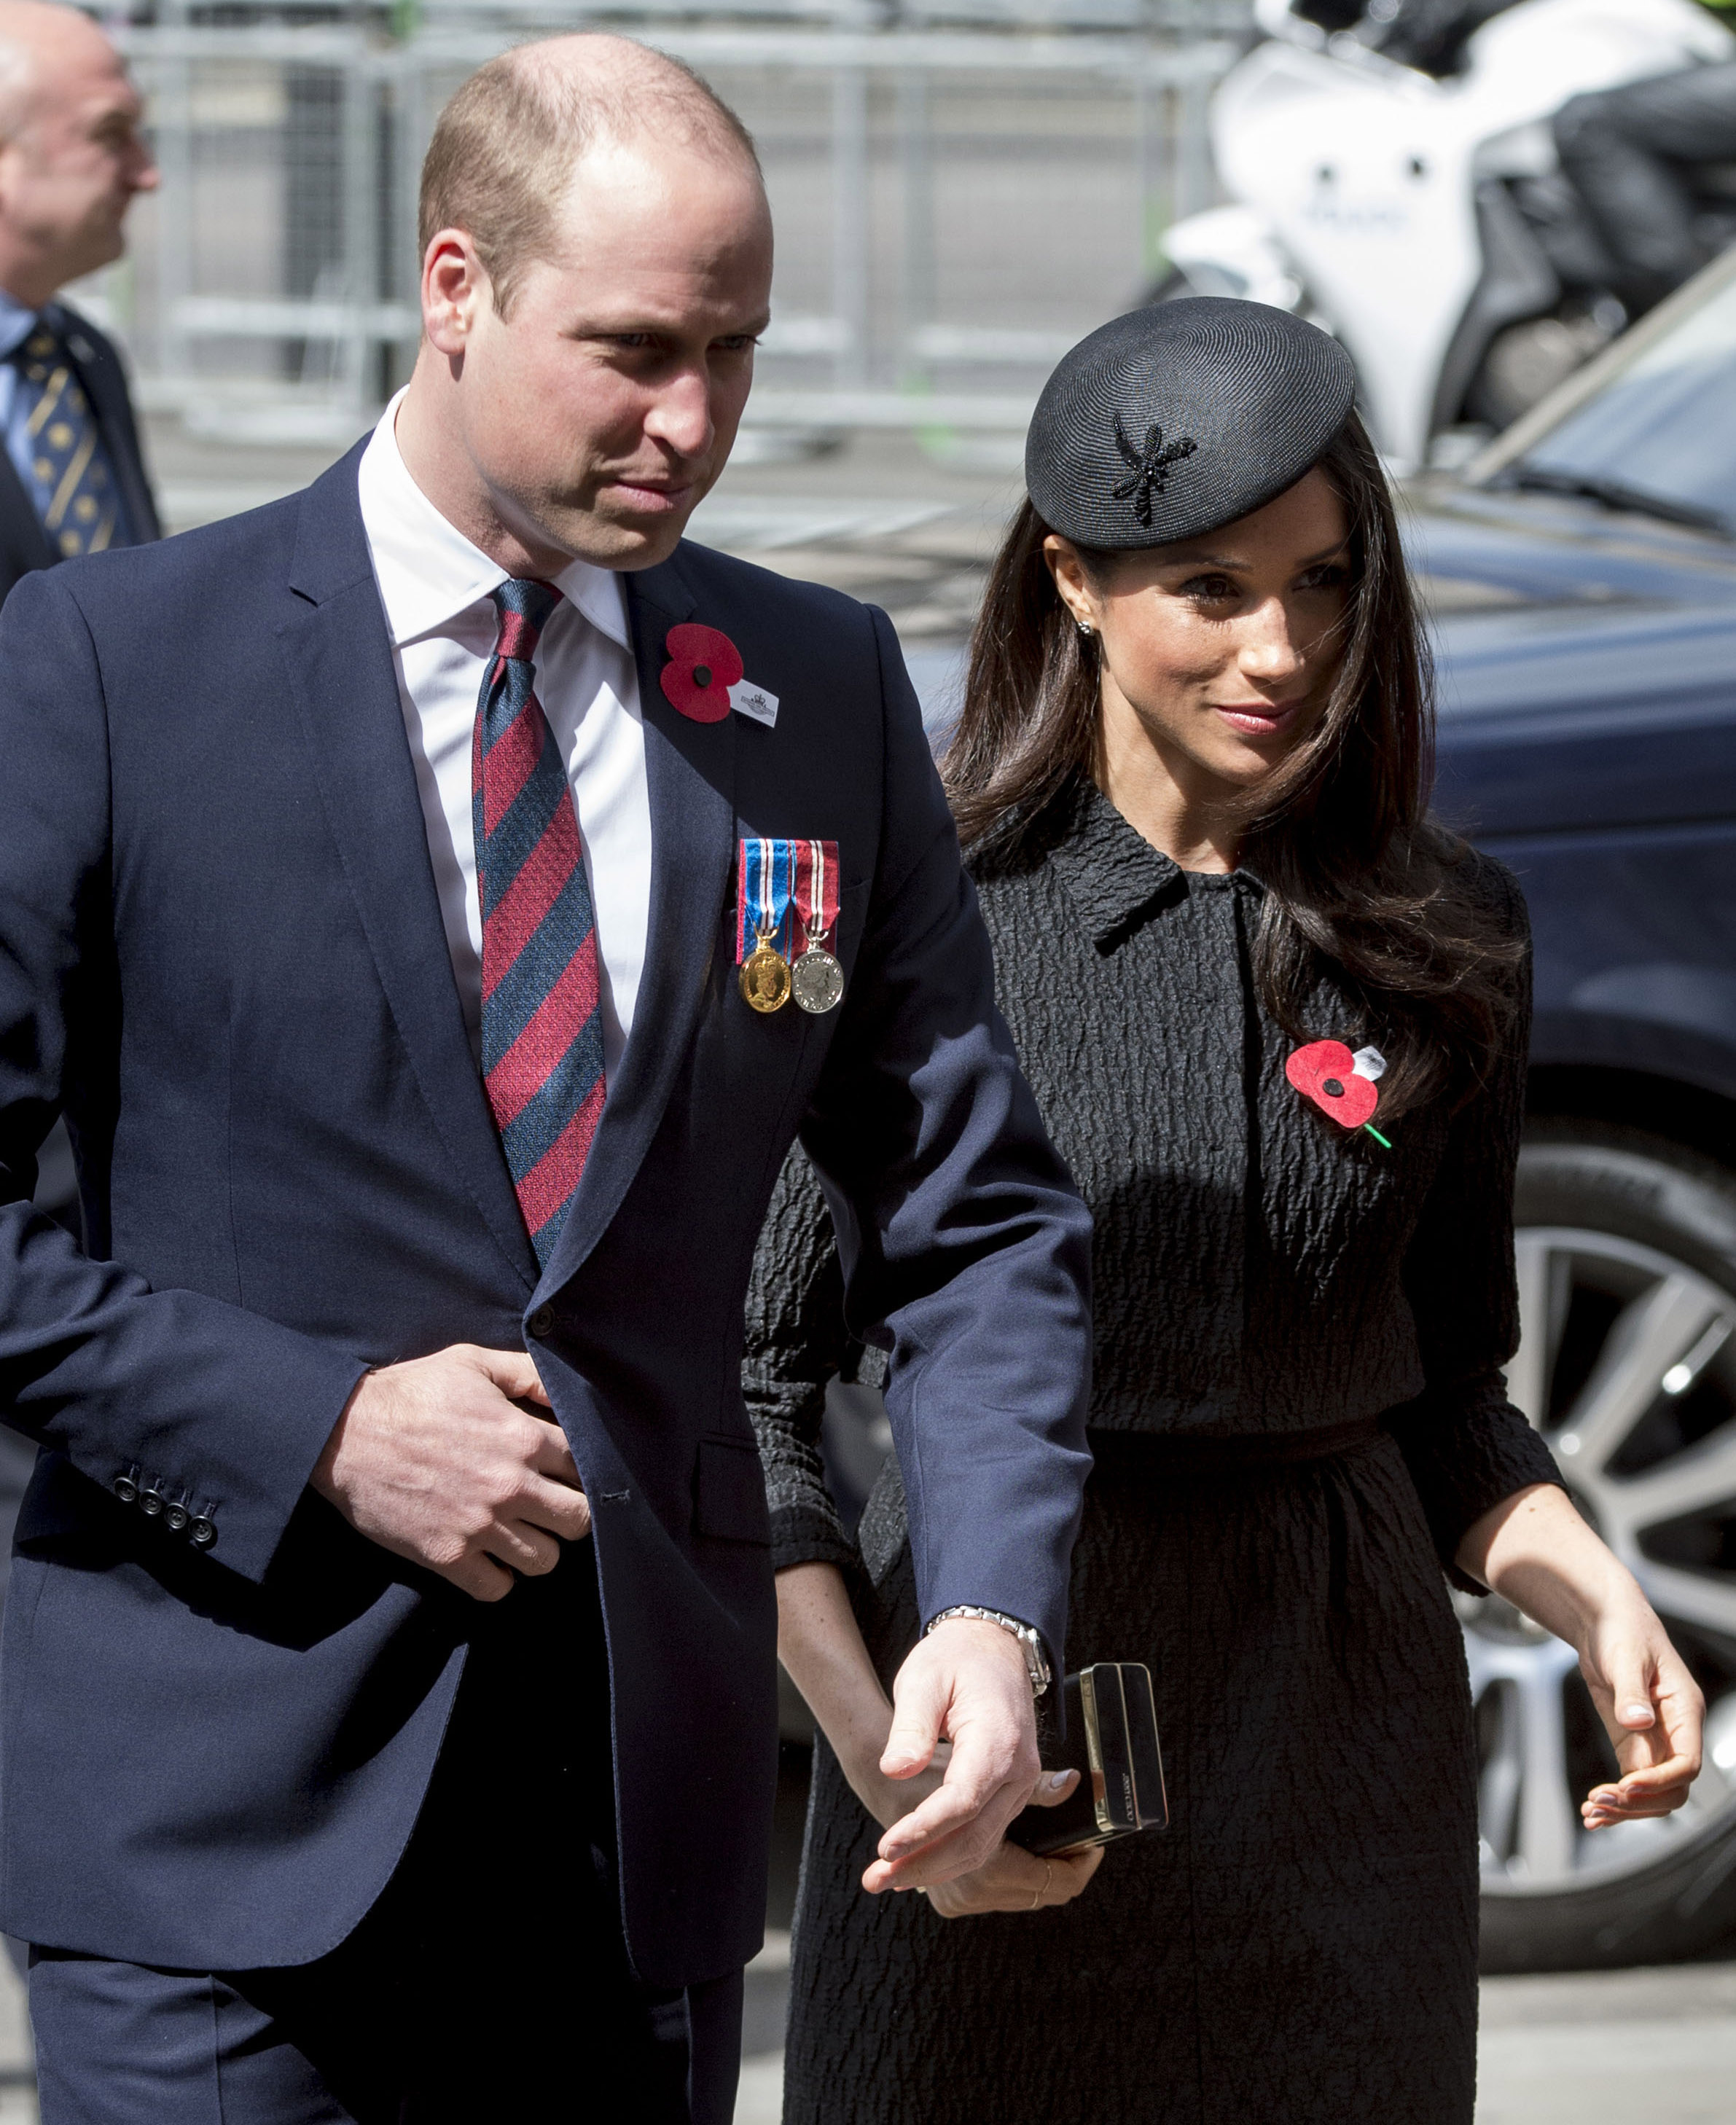 Prince William and Meghan Markle walking into Westminster Abbey for an Anzac Day service